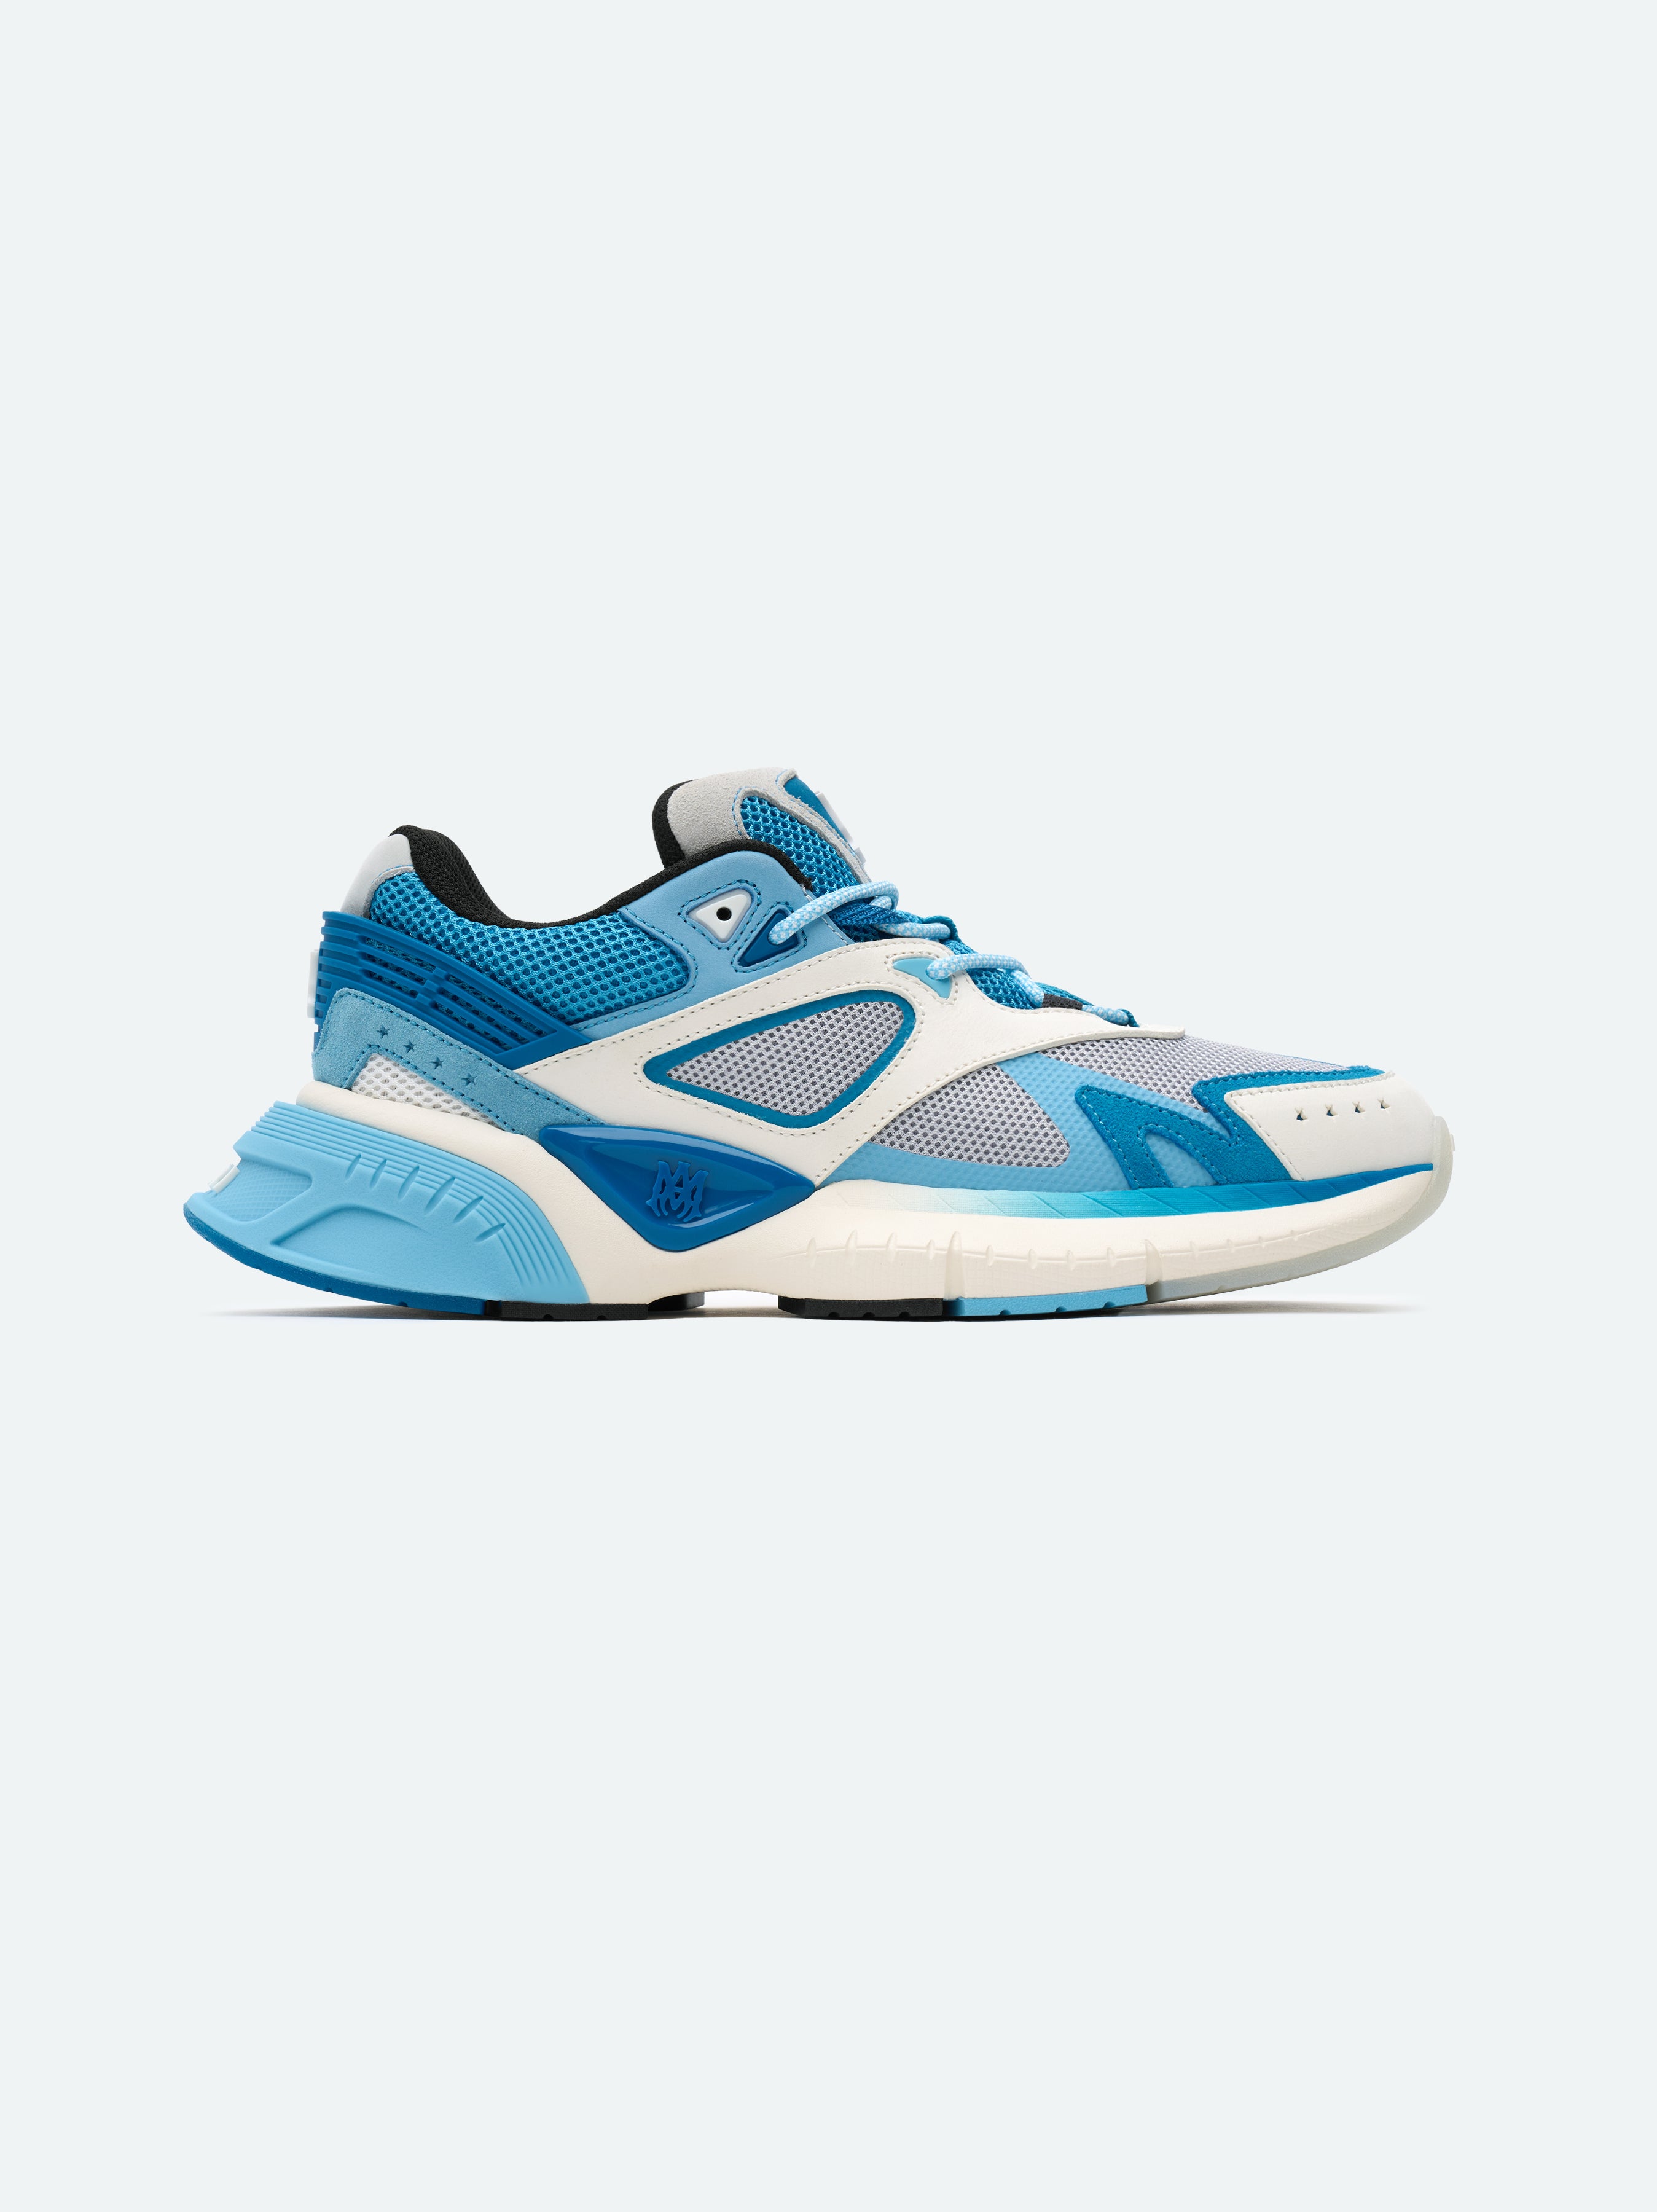 Product MA RUNNER - Air Blue featured image